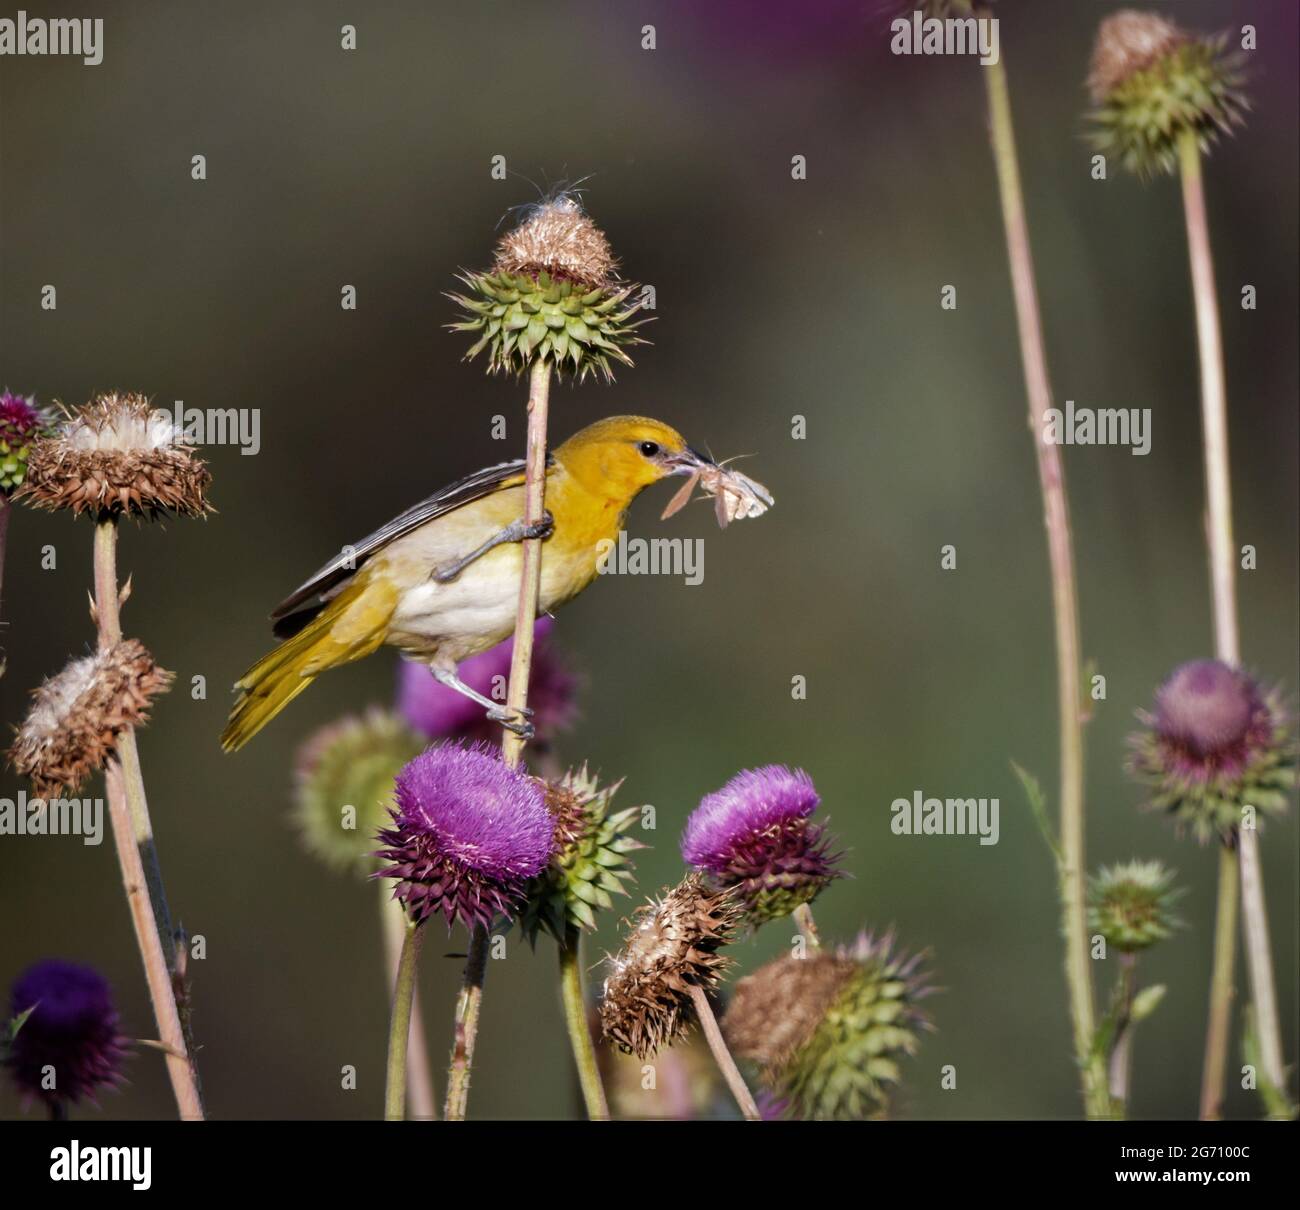 Female Bullocks Oriole feeding on a moth in a thistle field, The bullocks are named after a amateur naturalist named William Bullock. Stock Photo